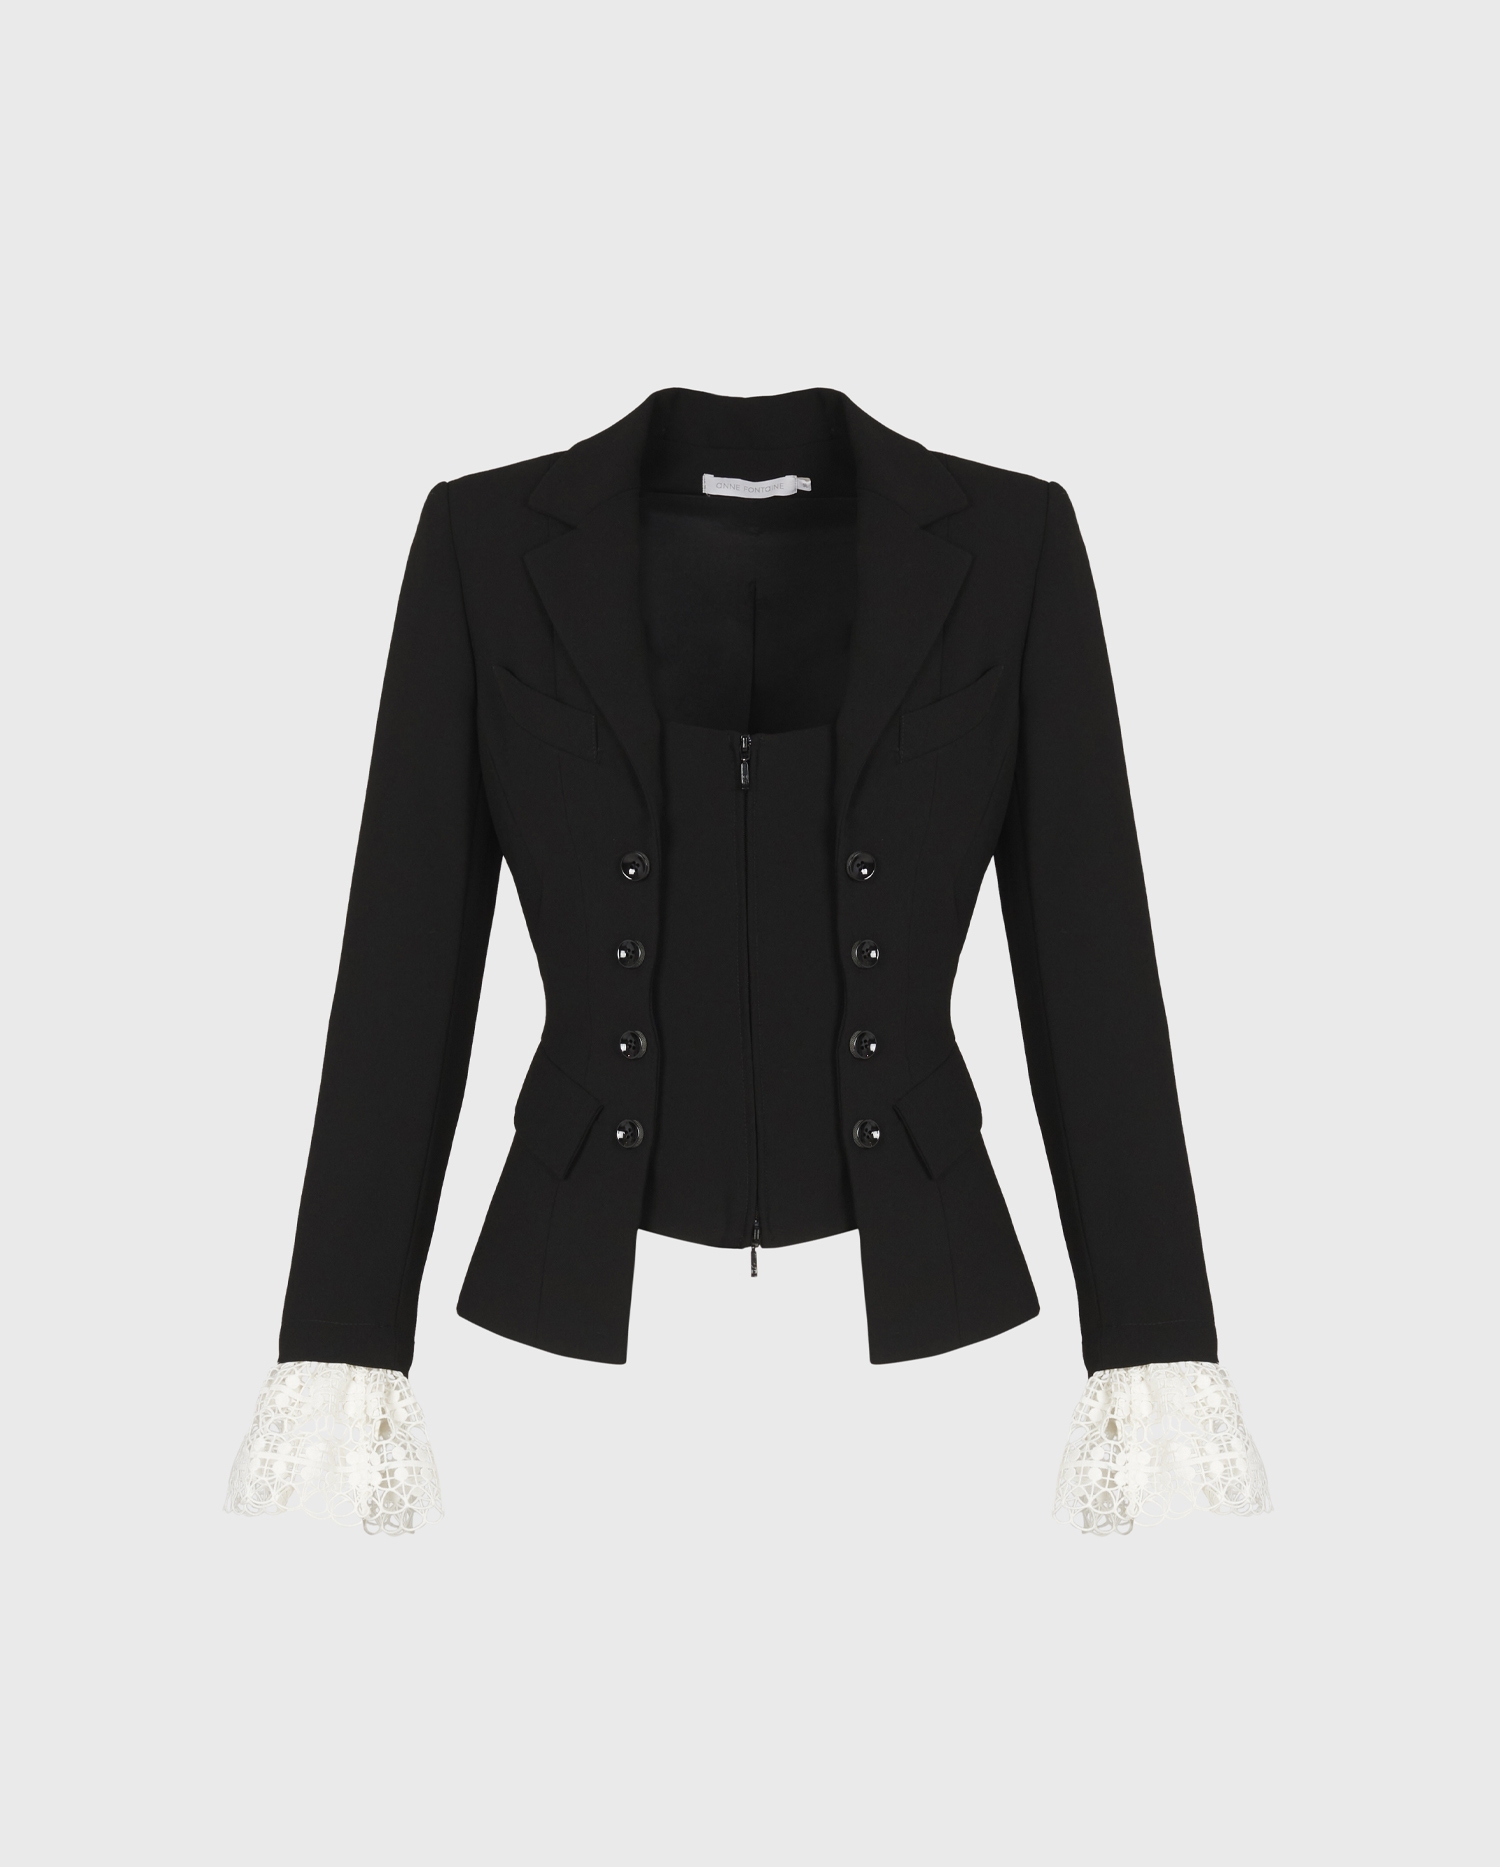 Discover the MAESTRO Long sleeve crepe jacket in black with lace cuff detailing from ANNE FONTAINE